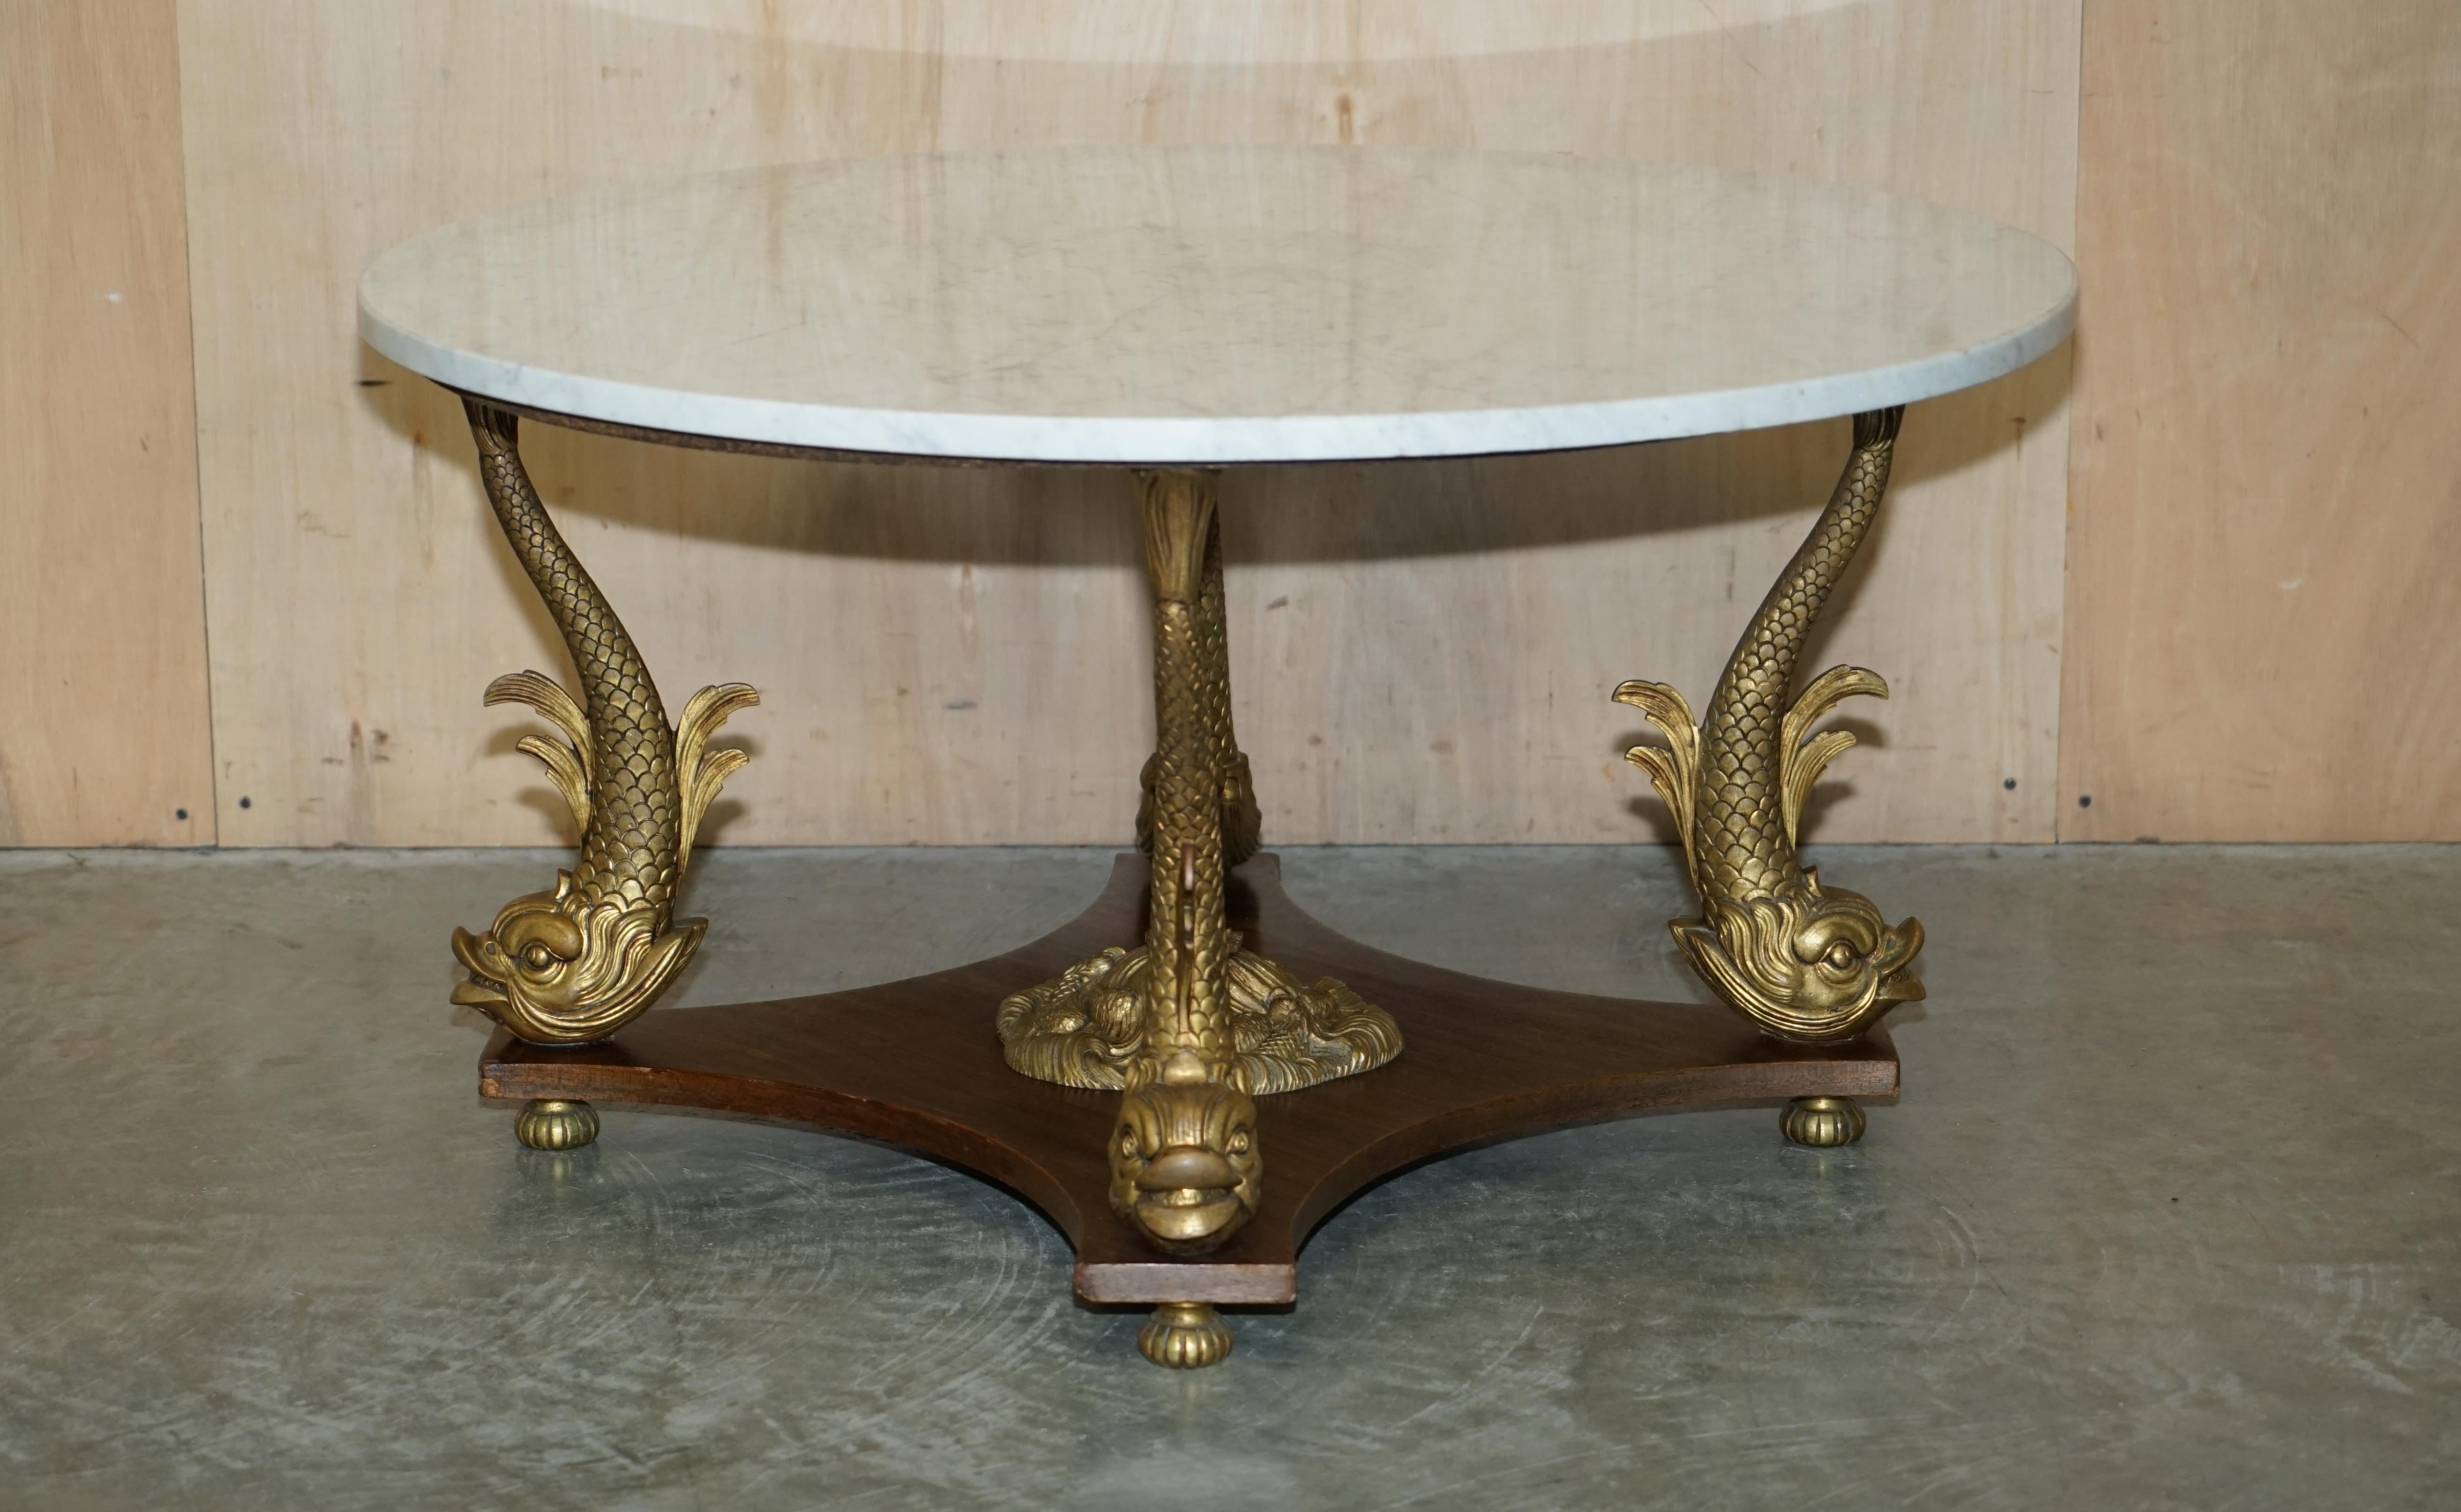 Royal House Antiques is delighted to offer for sale this important 19th century gilt brass Dolphin base French marble coffee or cocktail table 

A truly sublime table, the base is oak with solid gilt brass Dolphins and mounts, the top is very